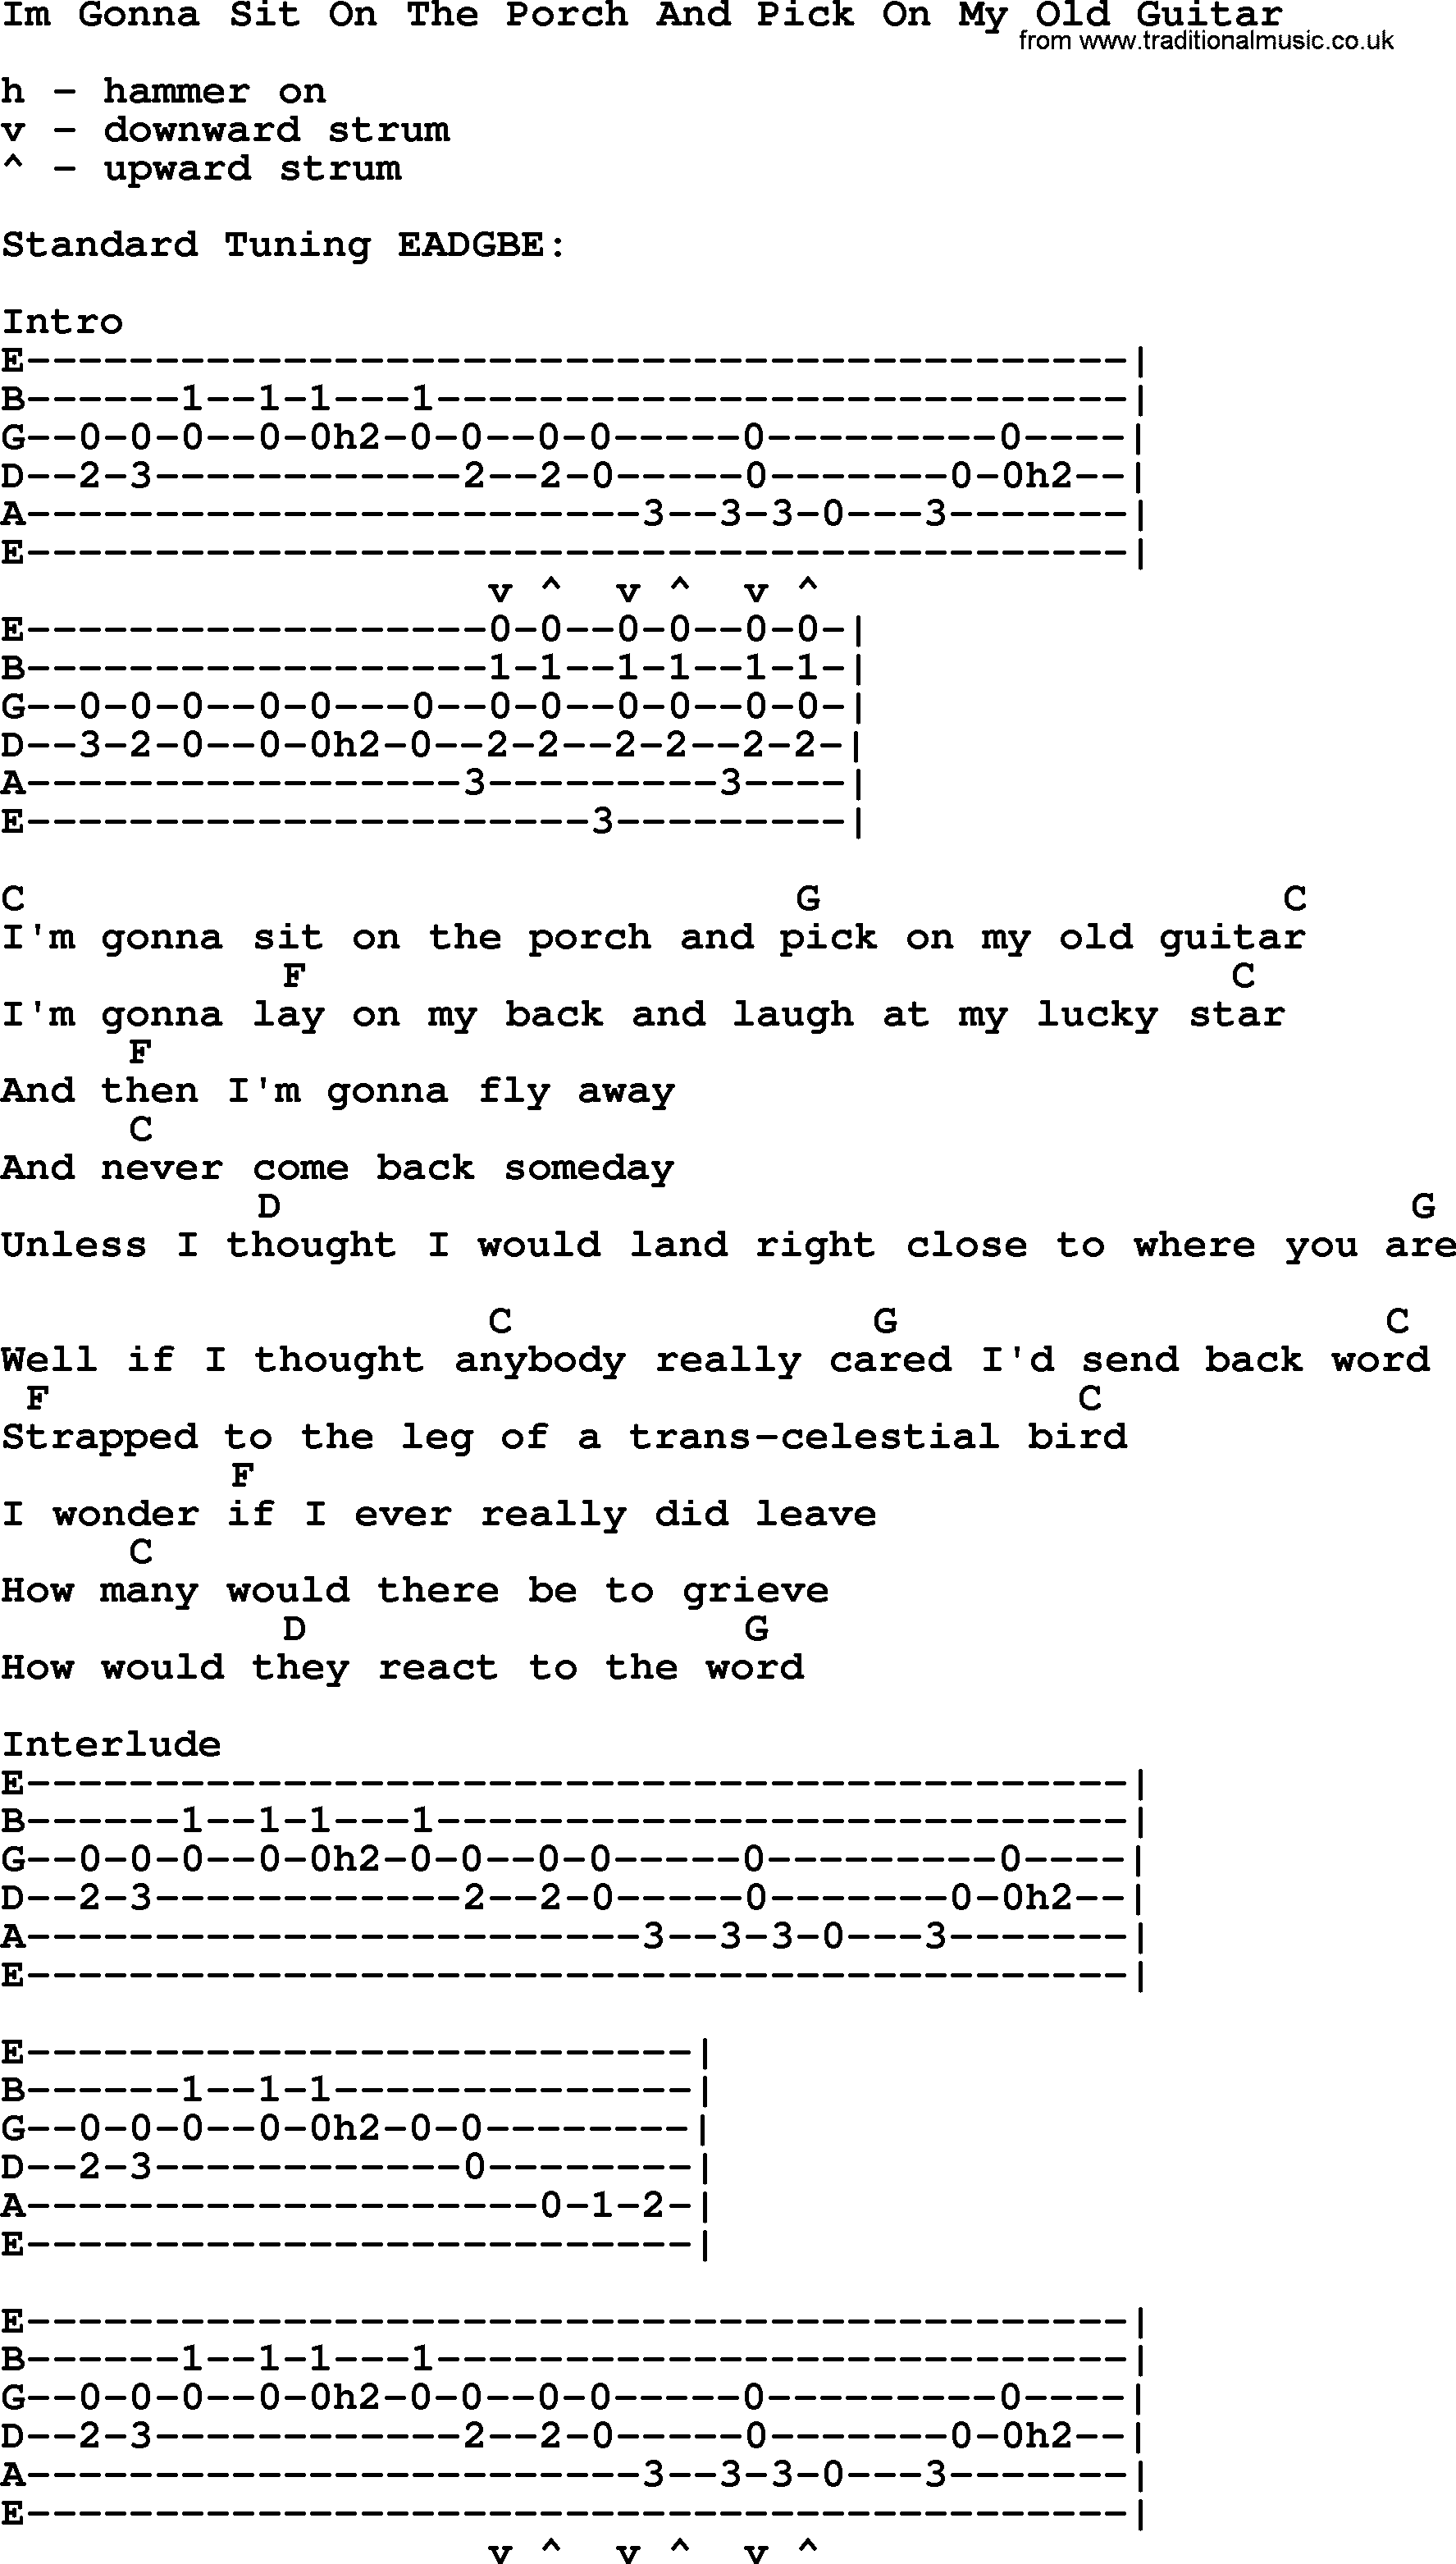 Johnny Cash song Im Gonna Sit On The Porch And Pick On My Old Guitar, lyrics and chords